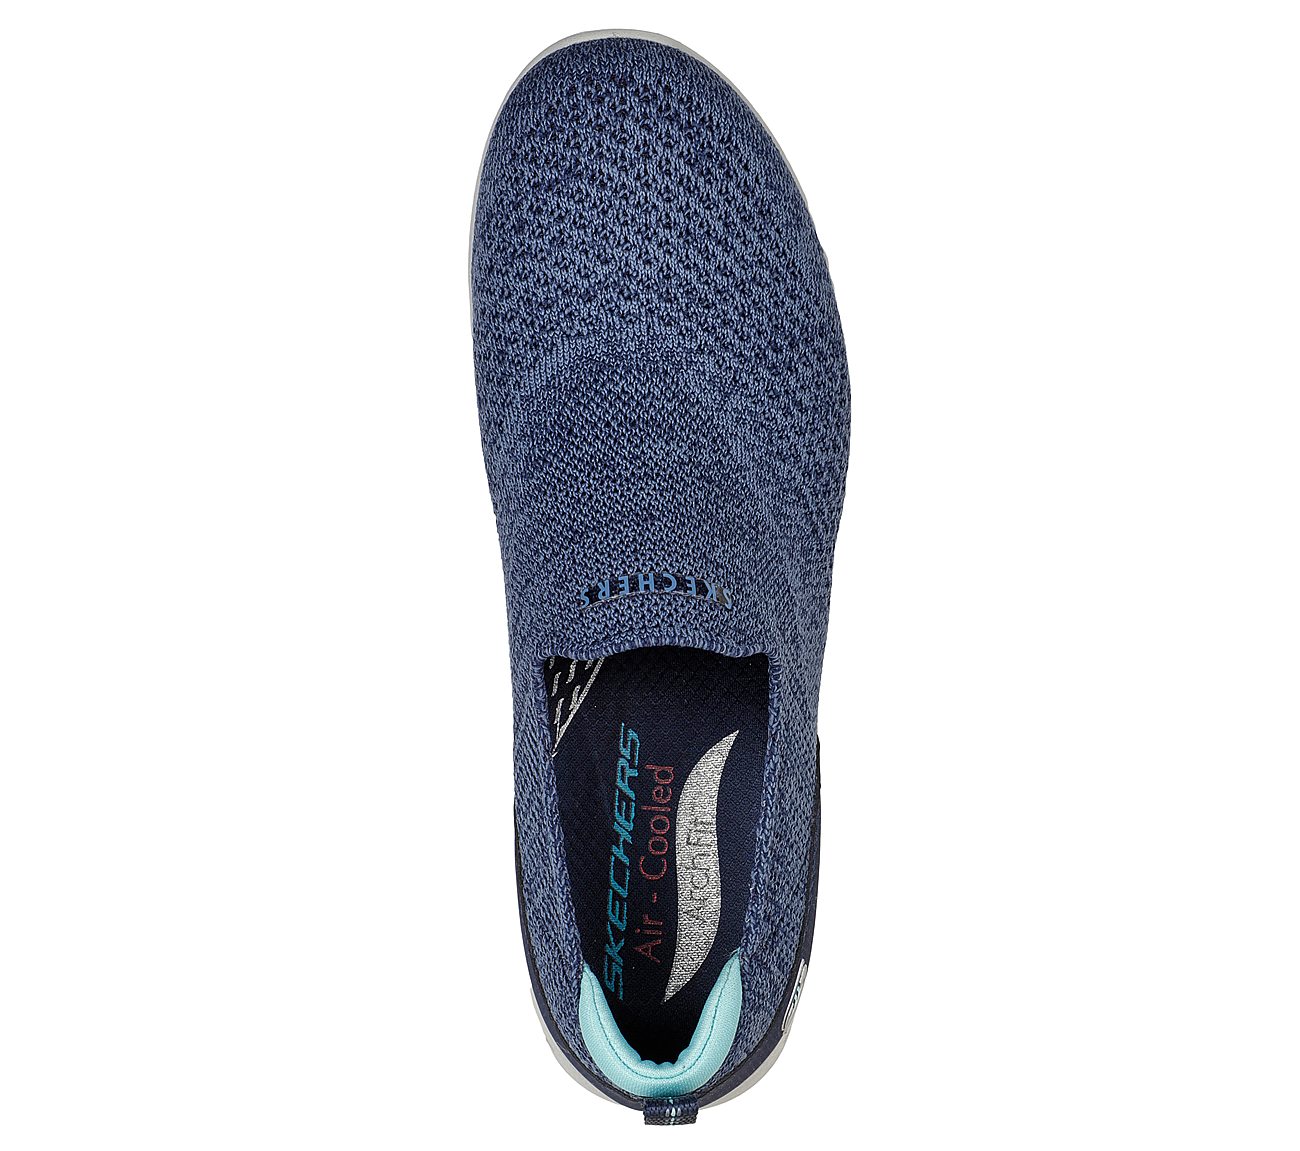 ARCH FIT REFINE - DON'T GO, NAVY/BLUE Footwear Top View